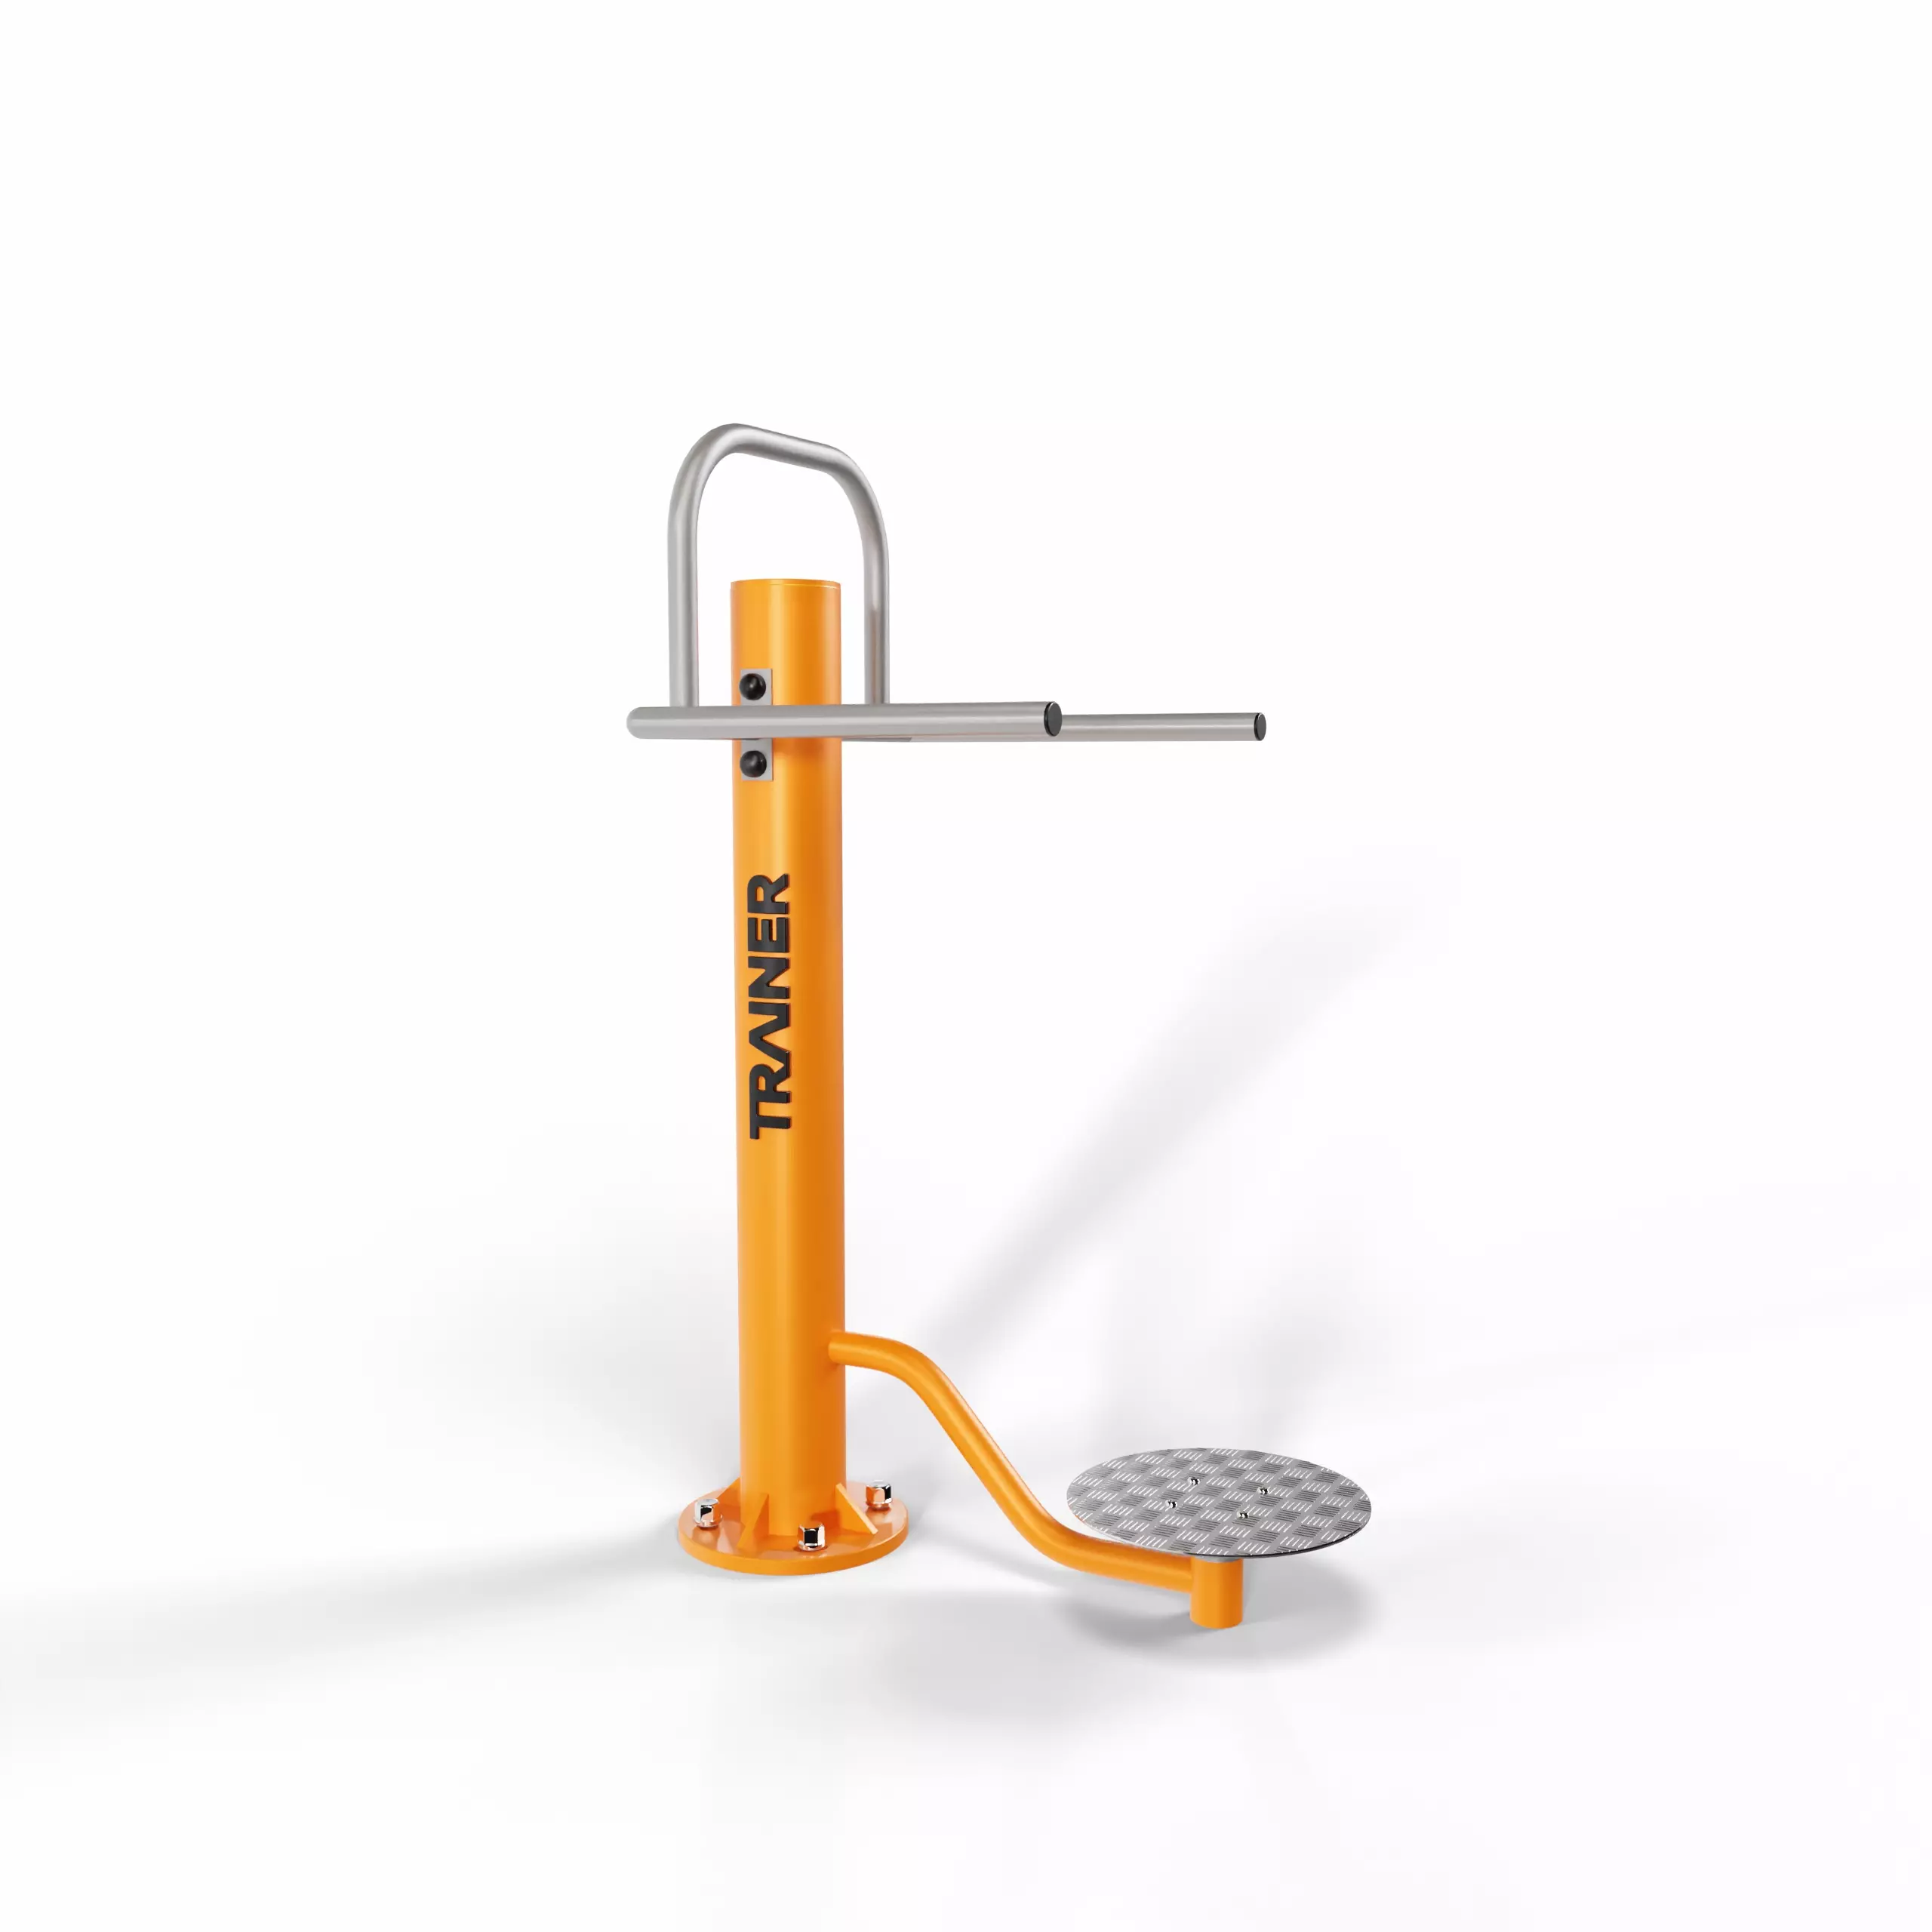 Outdoor gym equipment for parks and schools